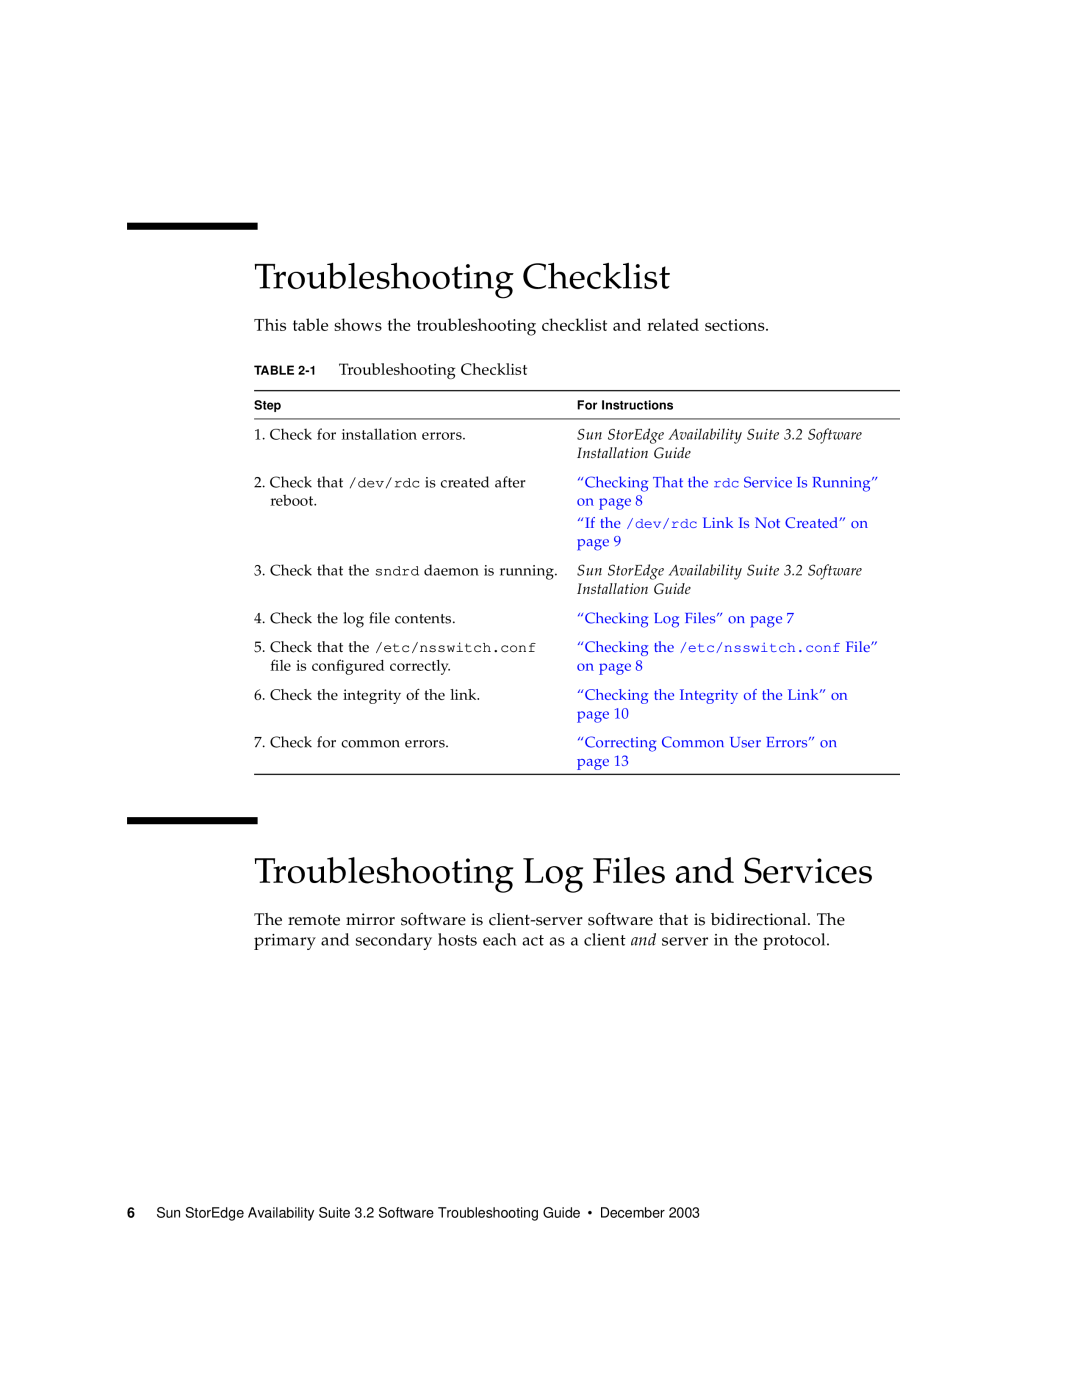 Sun Microsystems 3.2 manual Troubleshooting Log Files and Services, 1 Troubleshooting Checklist 